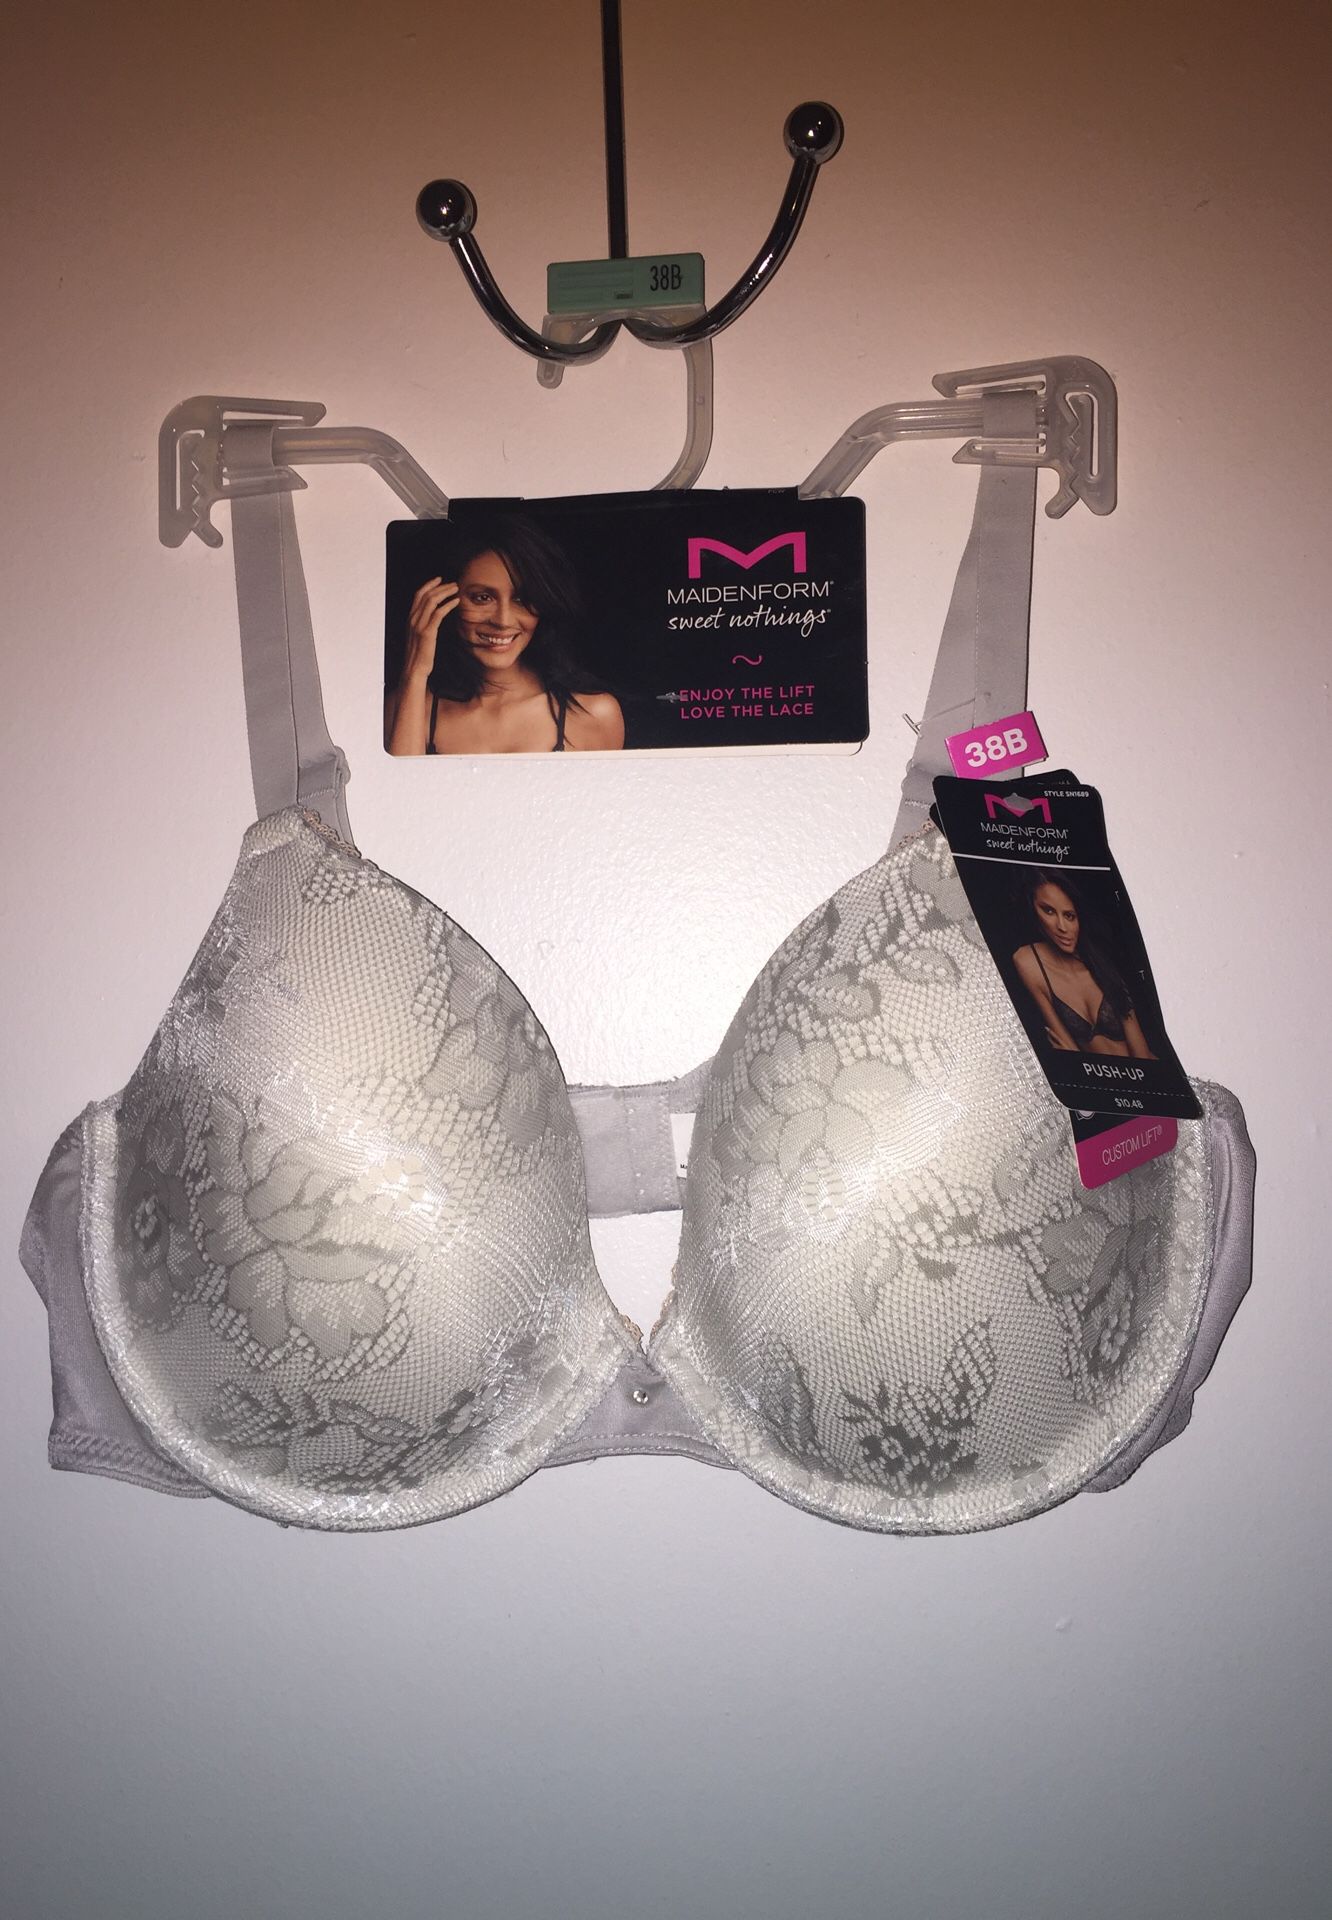 Maiden Form Sweet Nothings Bra 38B for Sale in Charlotte, NC - OfferUp